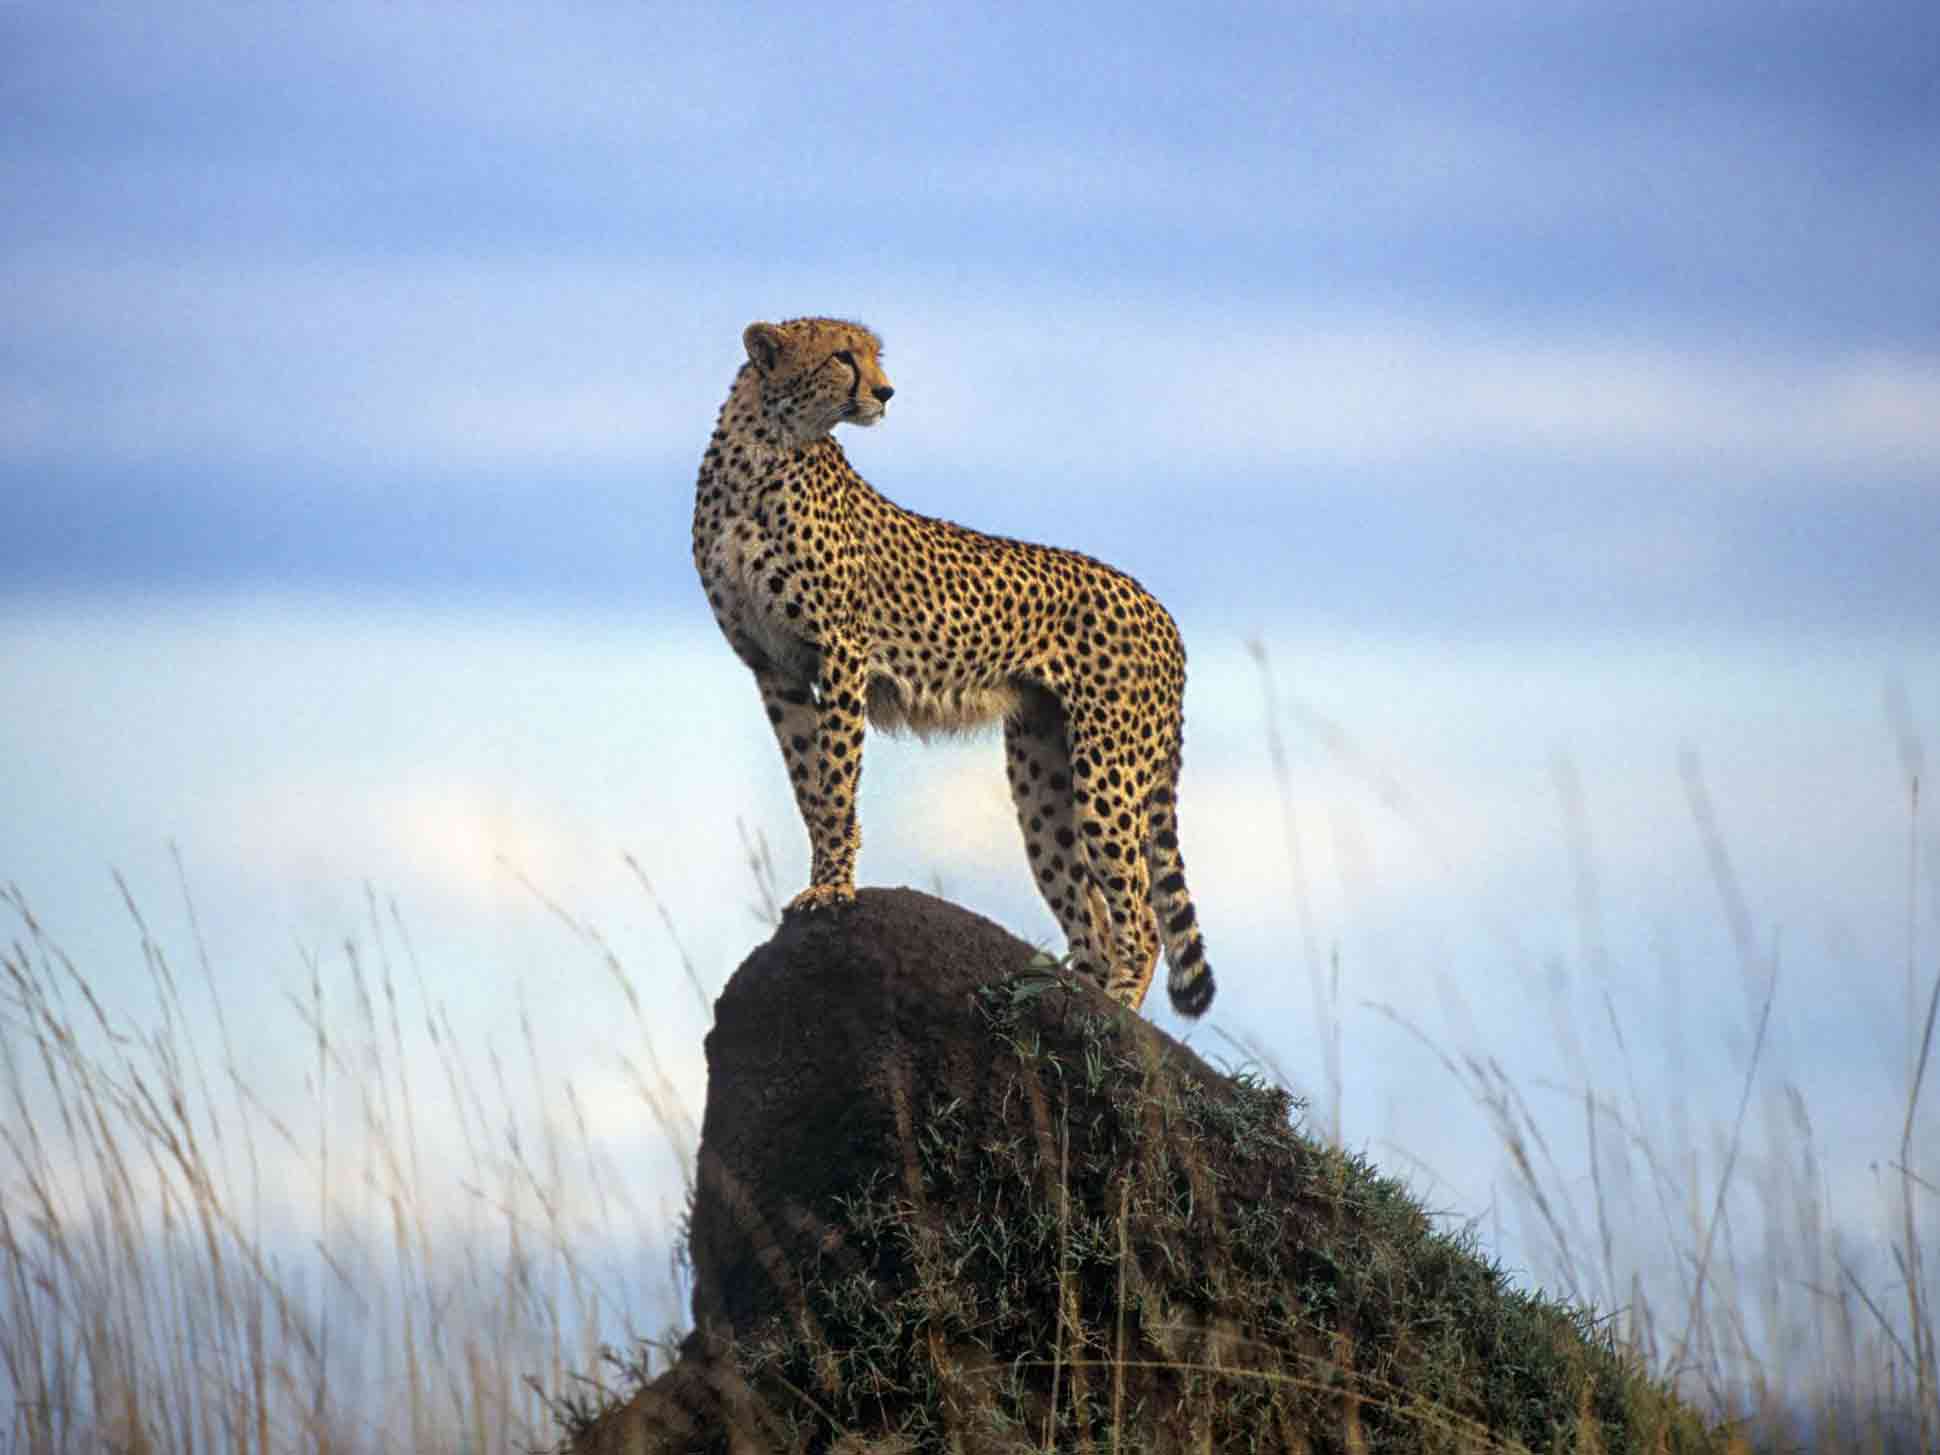 Cheetah plains offer exclusive-use villas, changing up the traditional safari-lodge concept